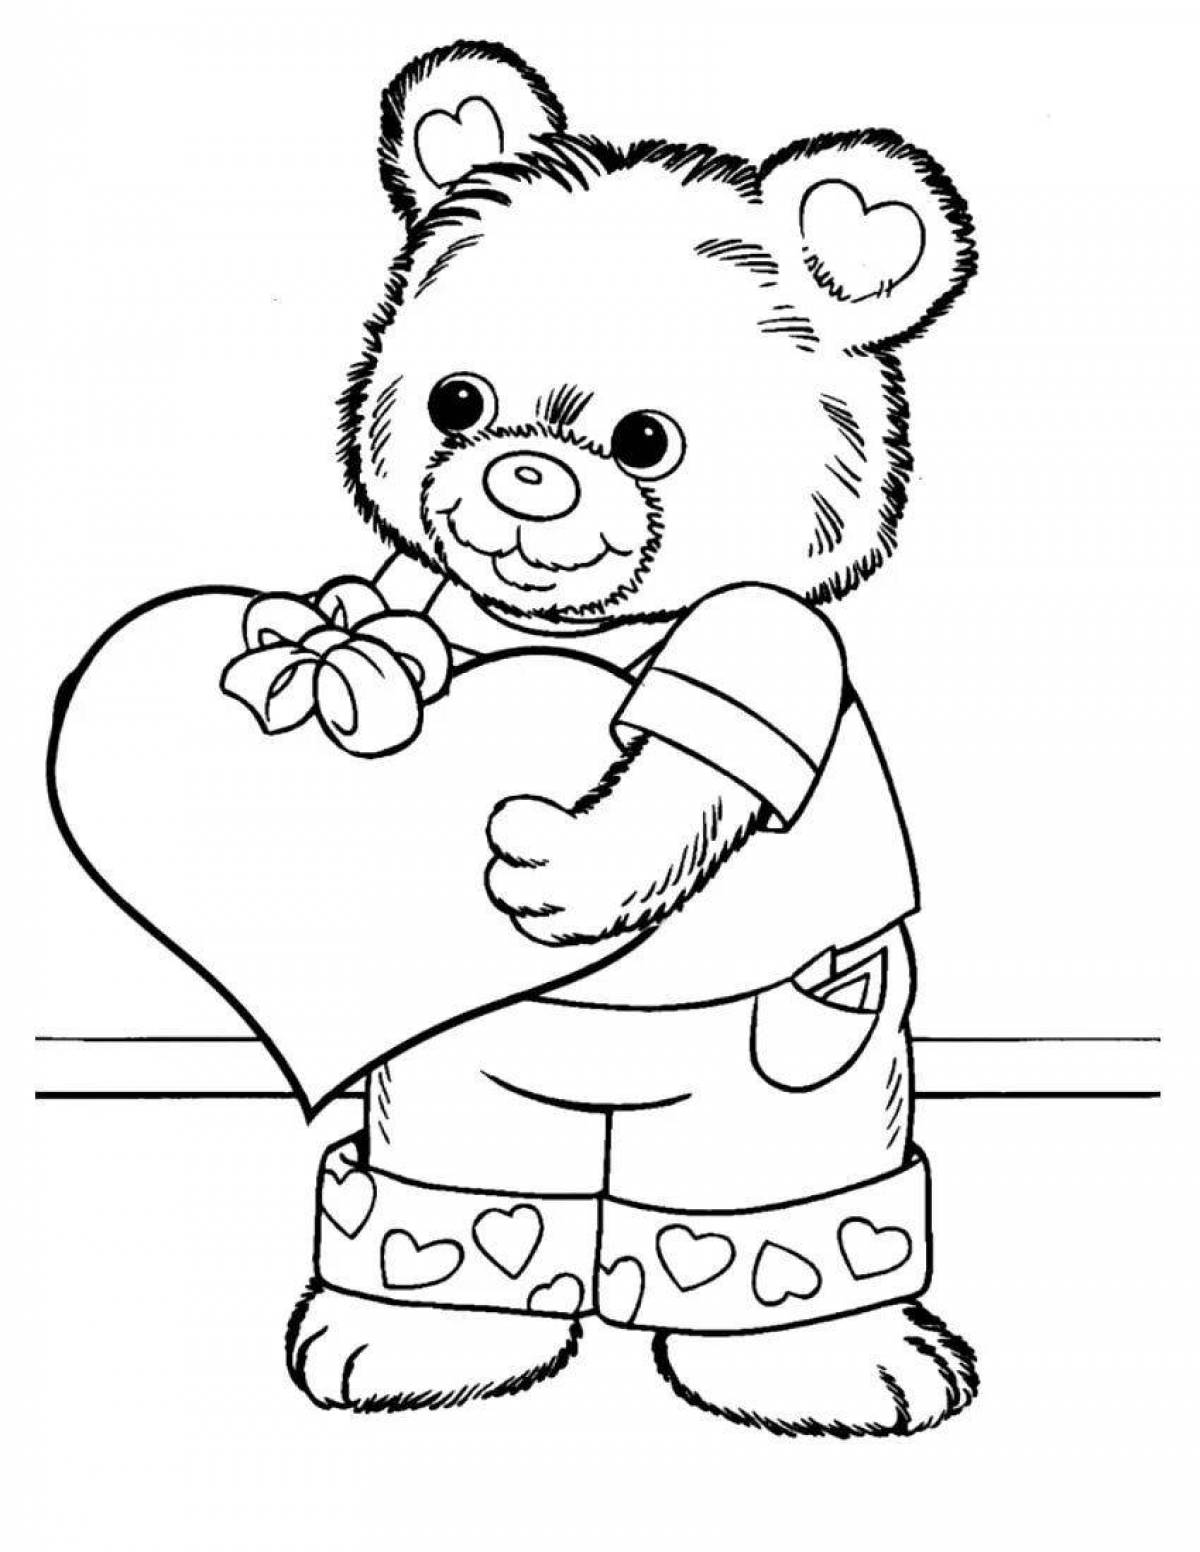 Laughing bear coloring page